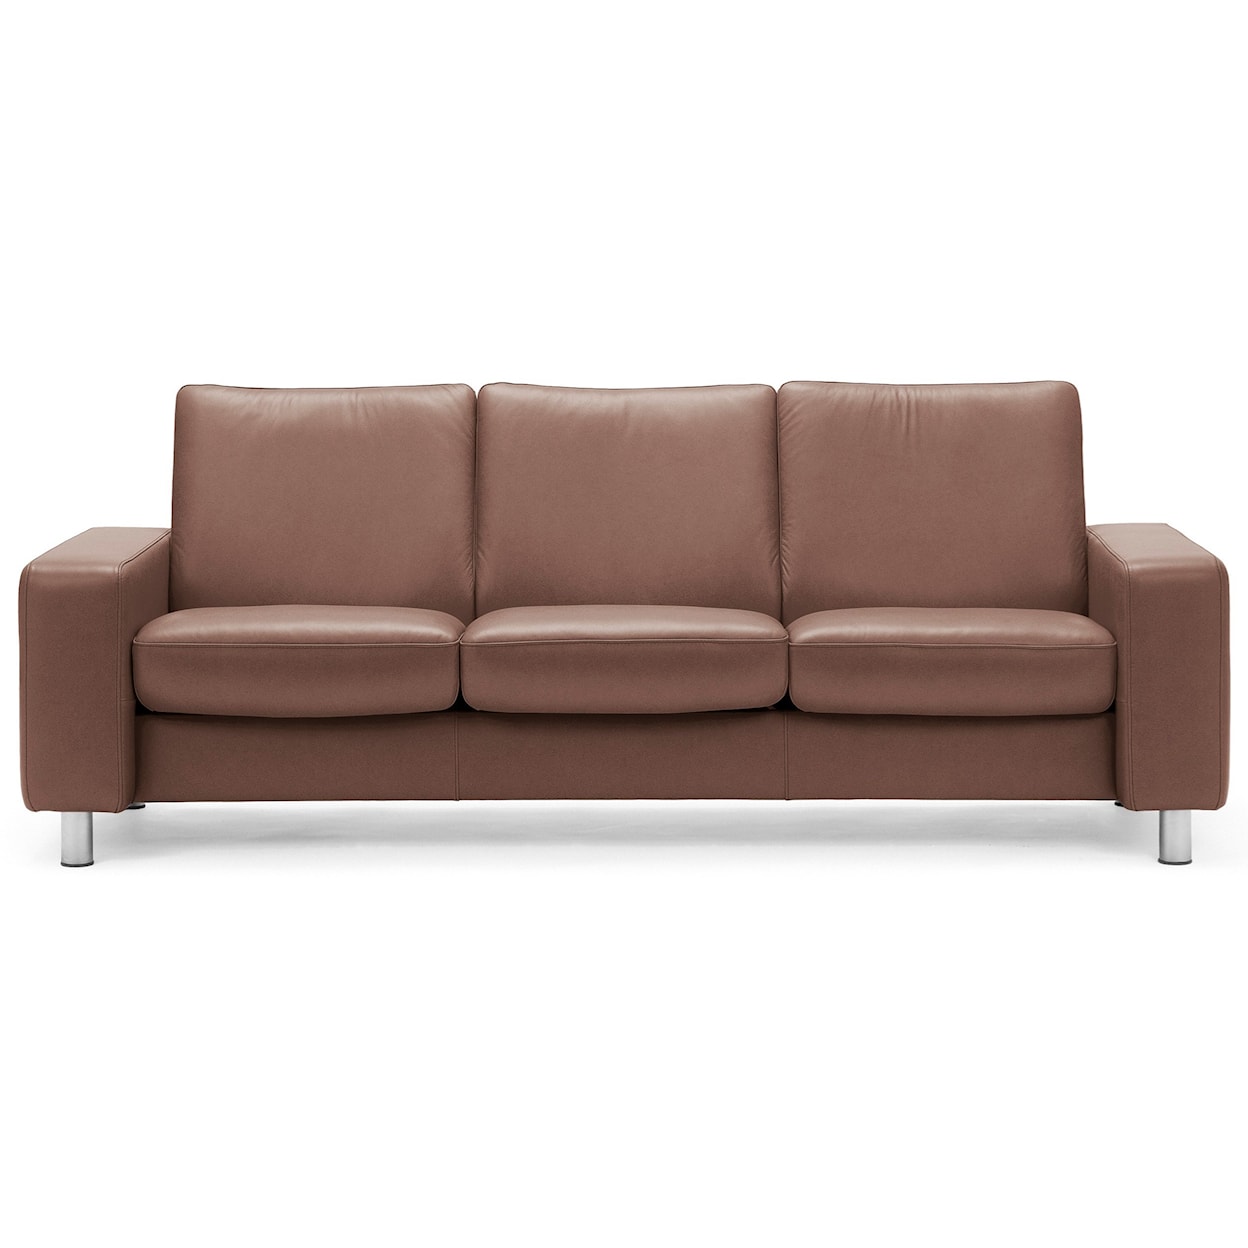 Stressless by Ekornes Arion 19 - A20 Low-Back Reclining Sofa